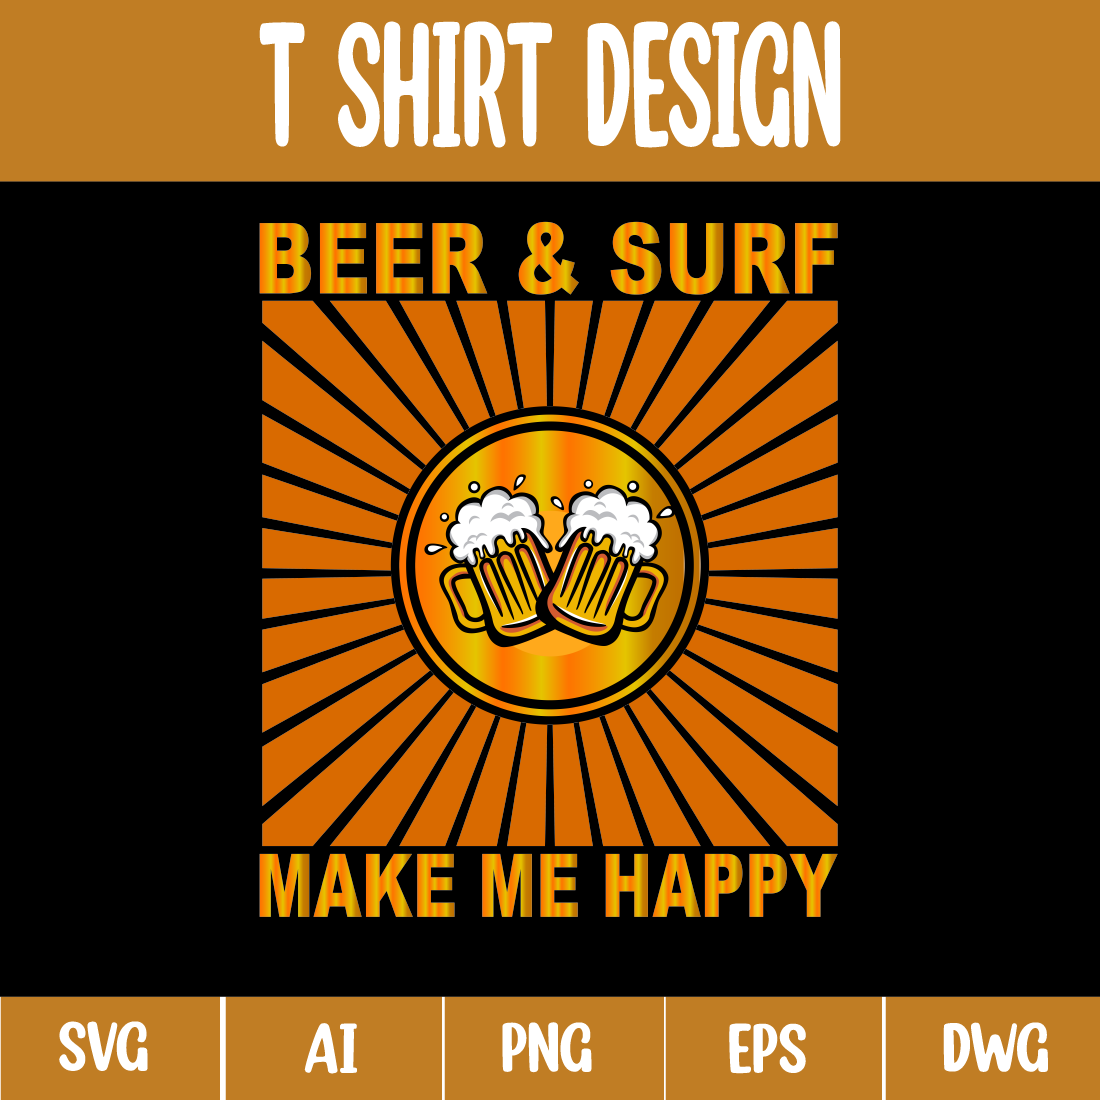 Beer T-Shirt Design cover image.